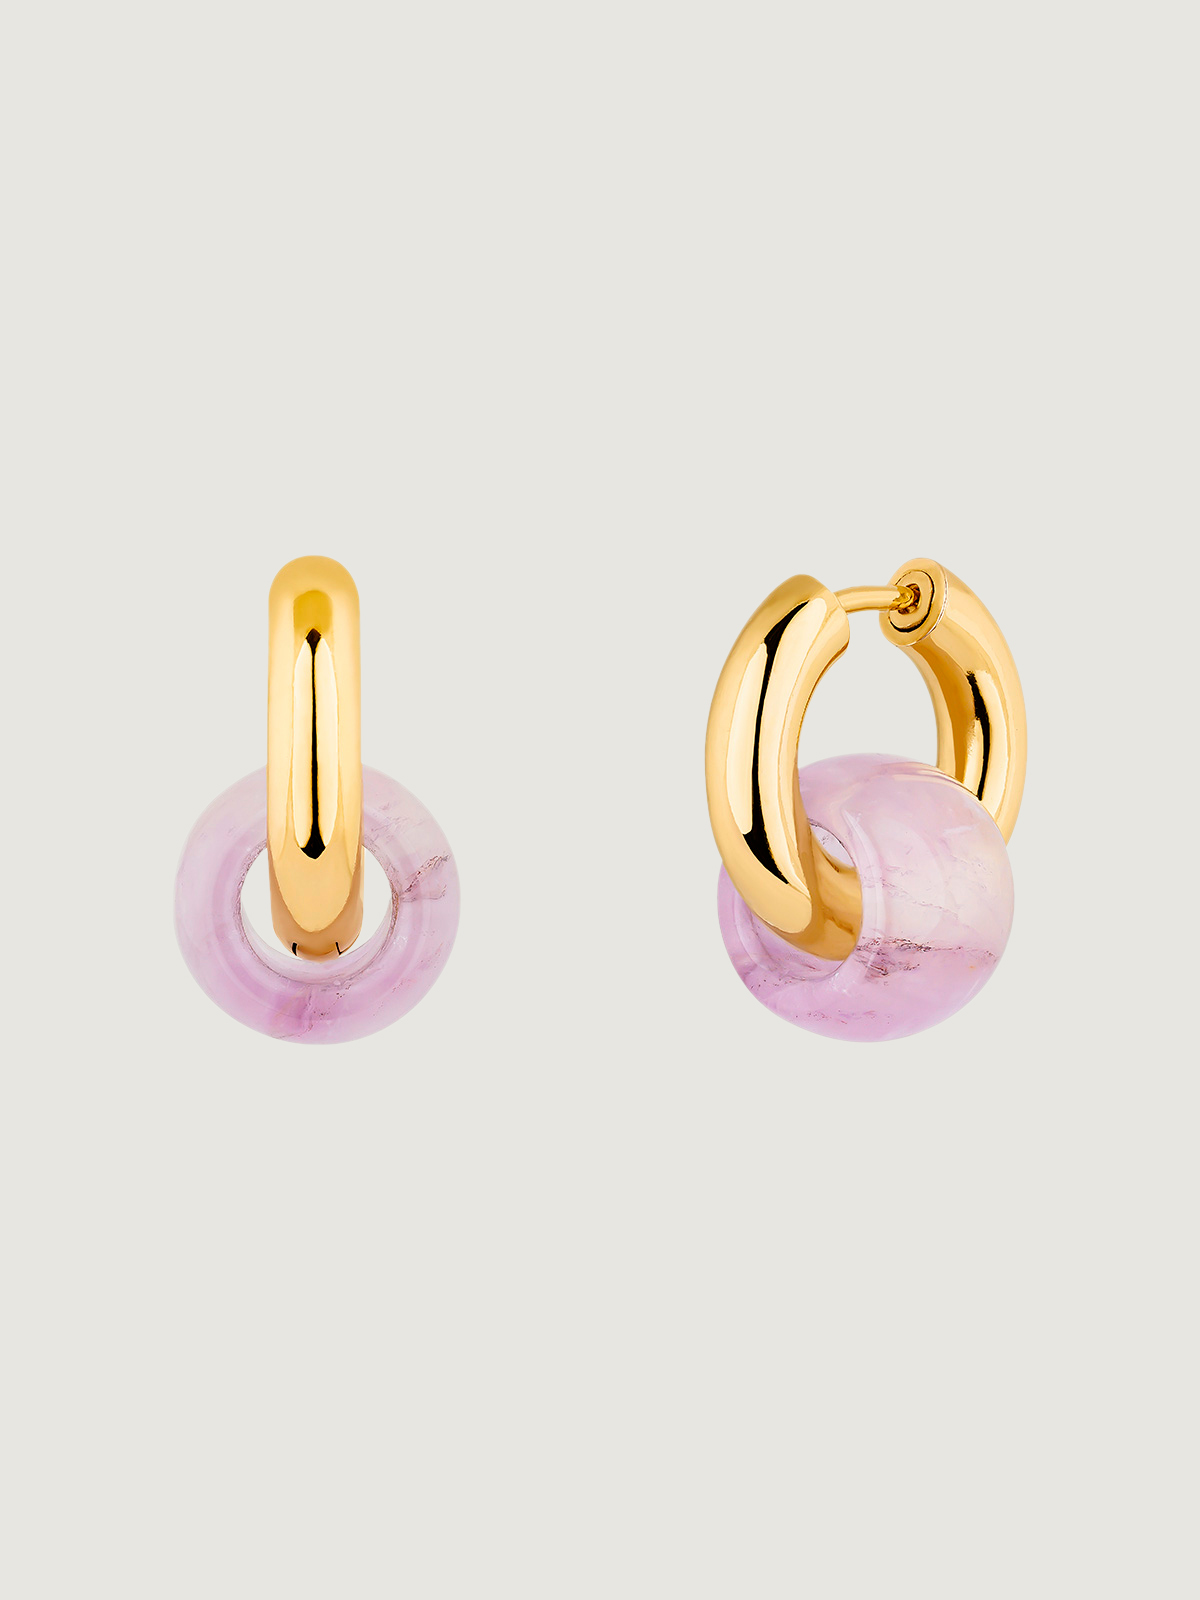 Medium-sized 925 silver hoop earrings bathed in 18K yellow gold with pink amethyst